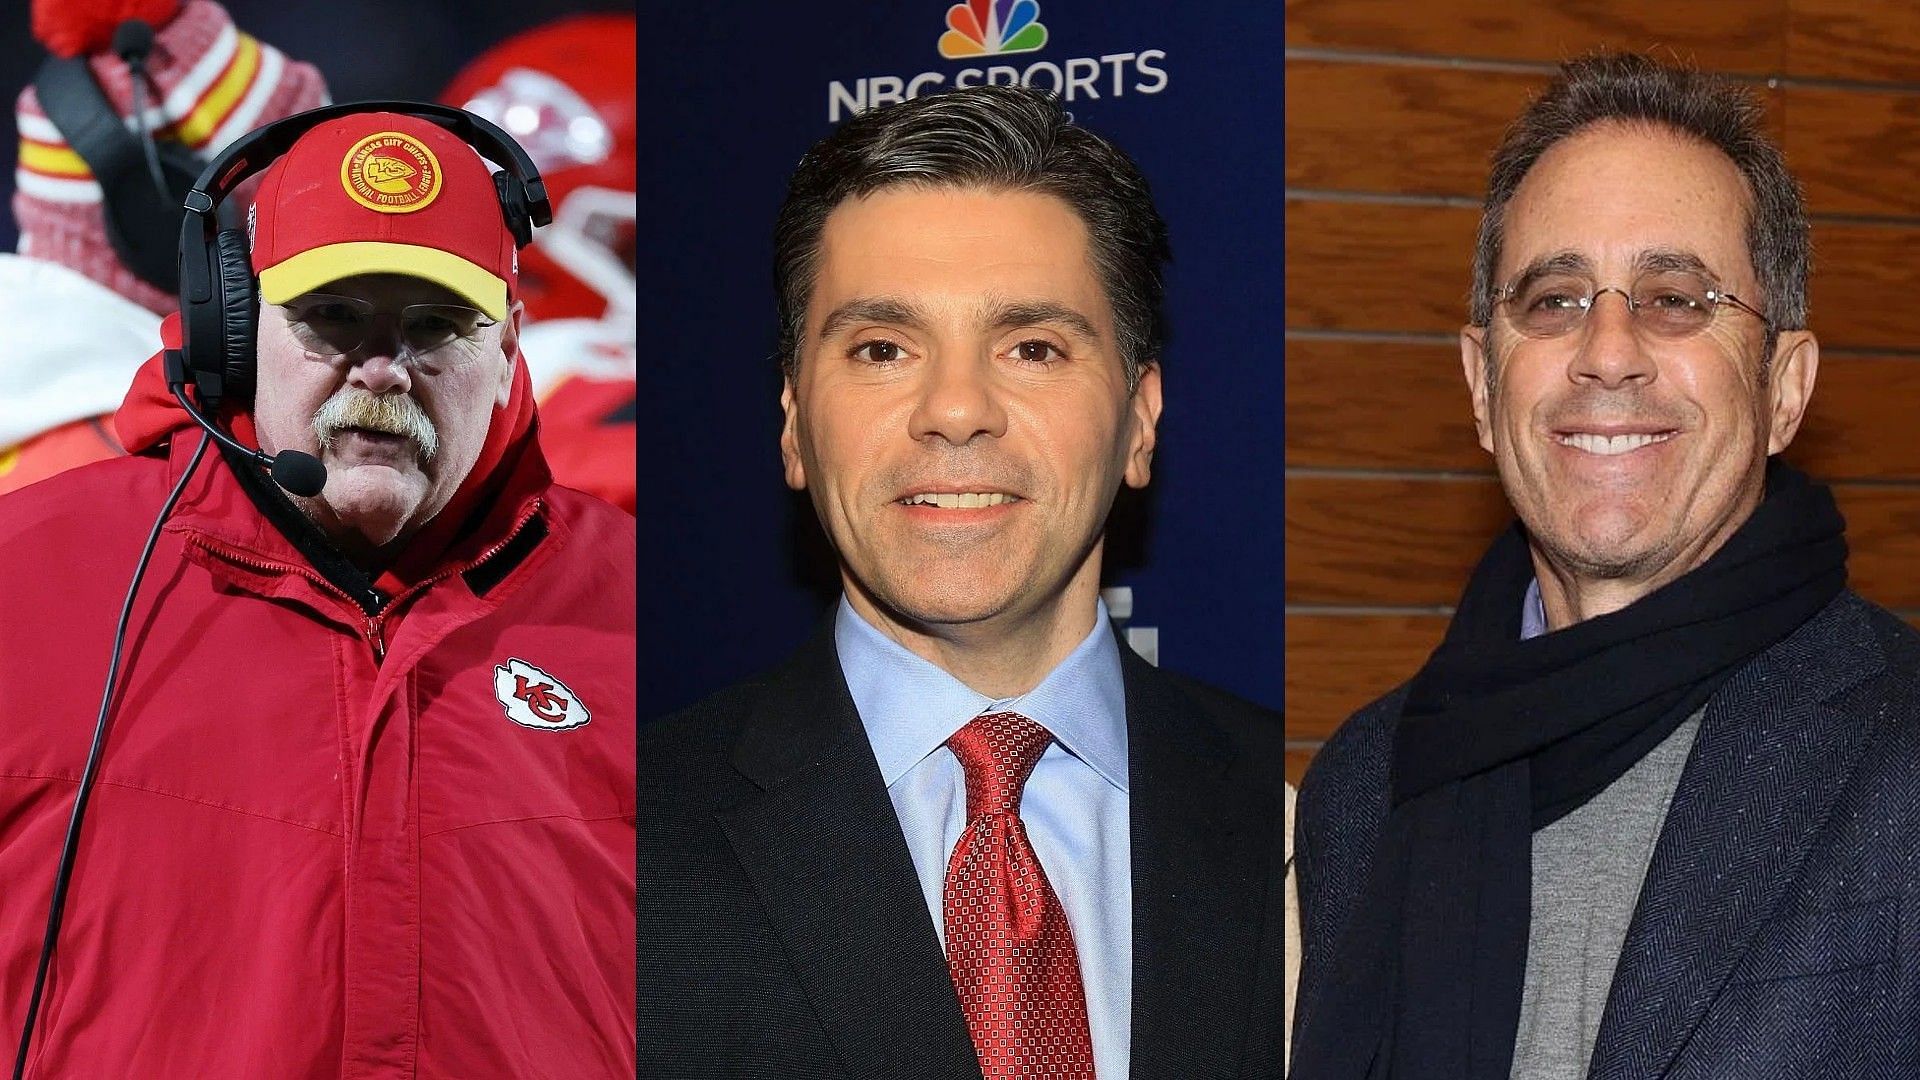 Mike Florio compares one Andy Reid under the radar ability to Jerry Seinfeld